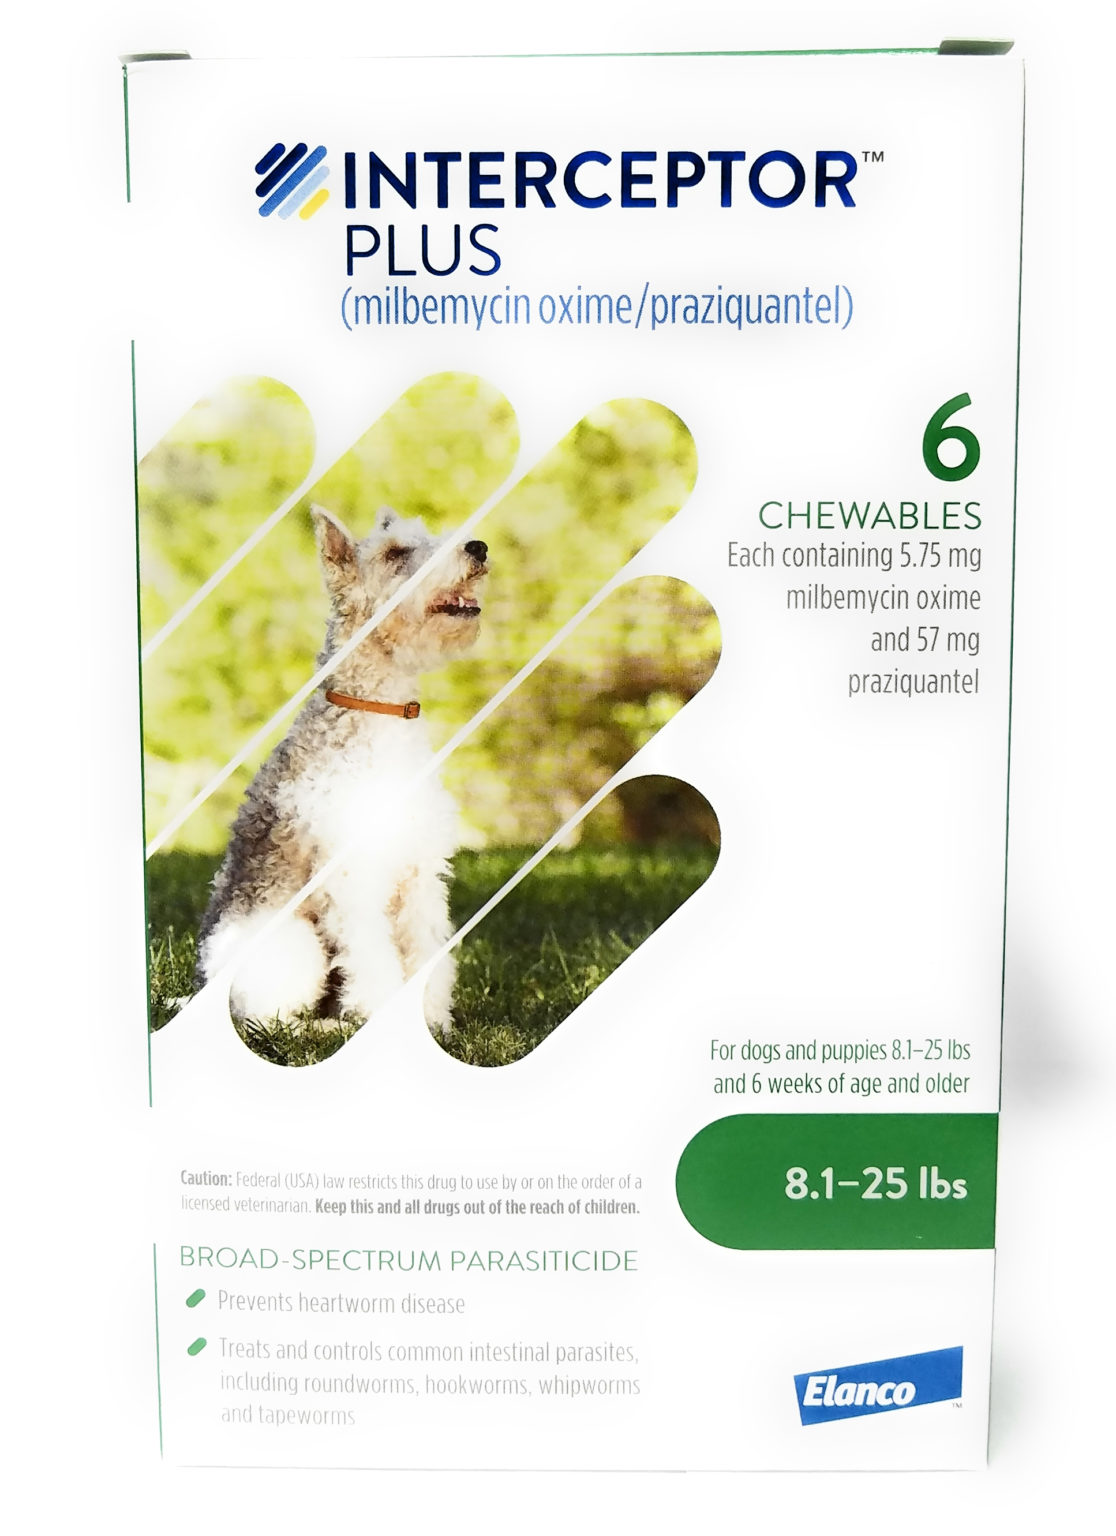 vet-approved-rx-interceptor-plus-chewable-for-dogs-green-8-1-25-lbs-6